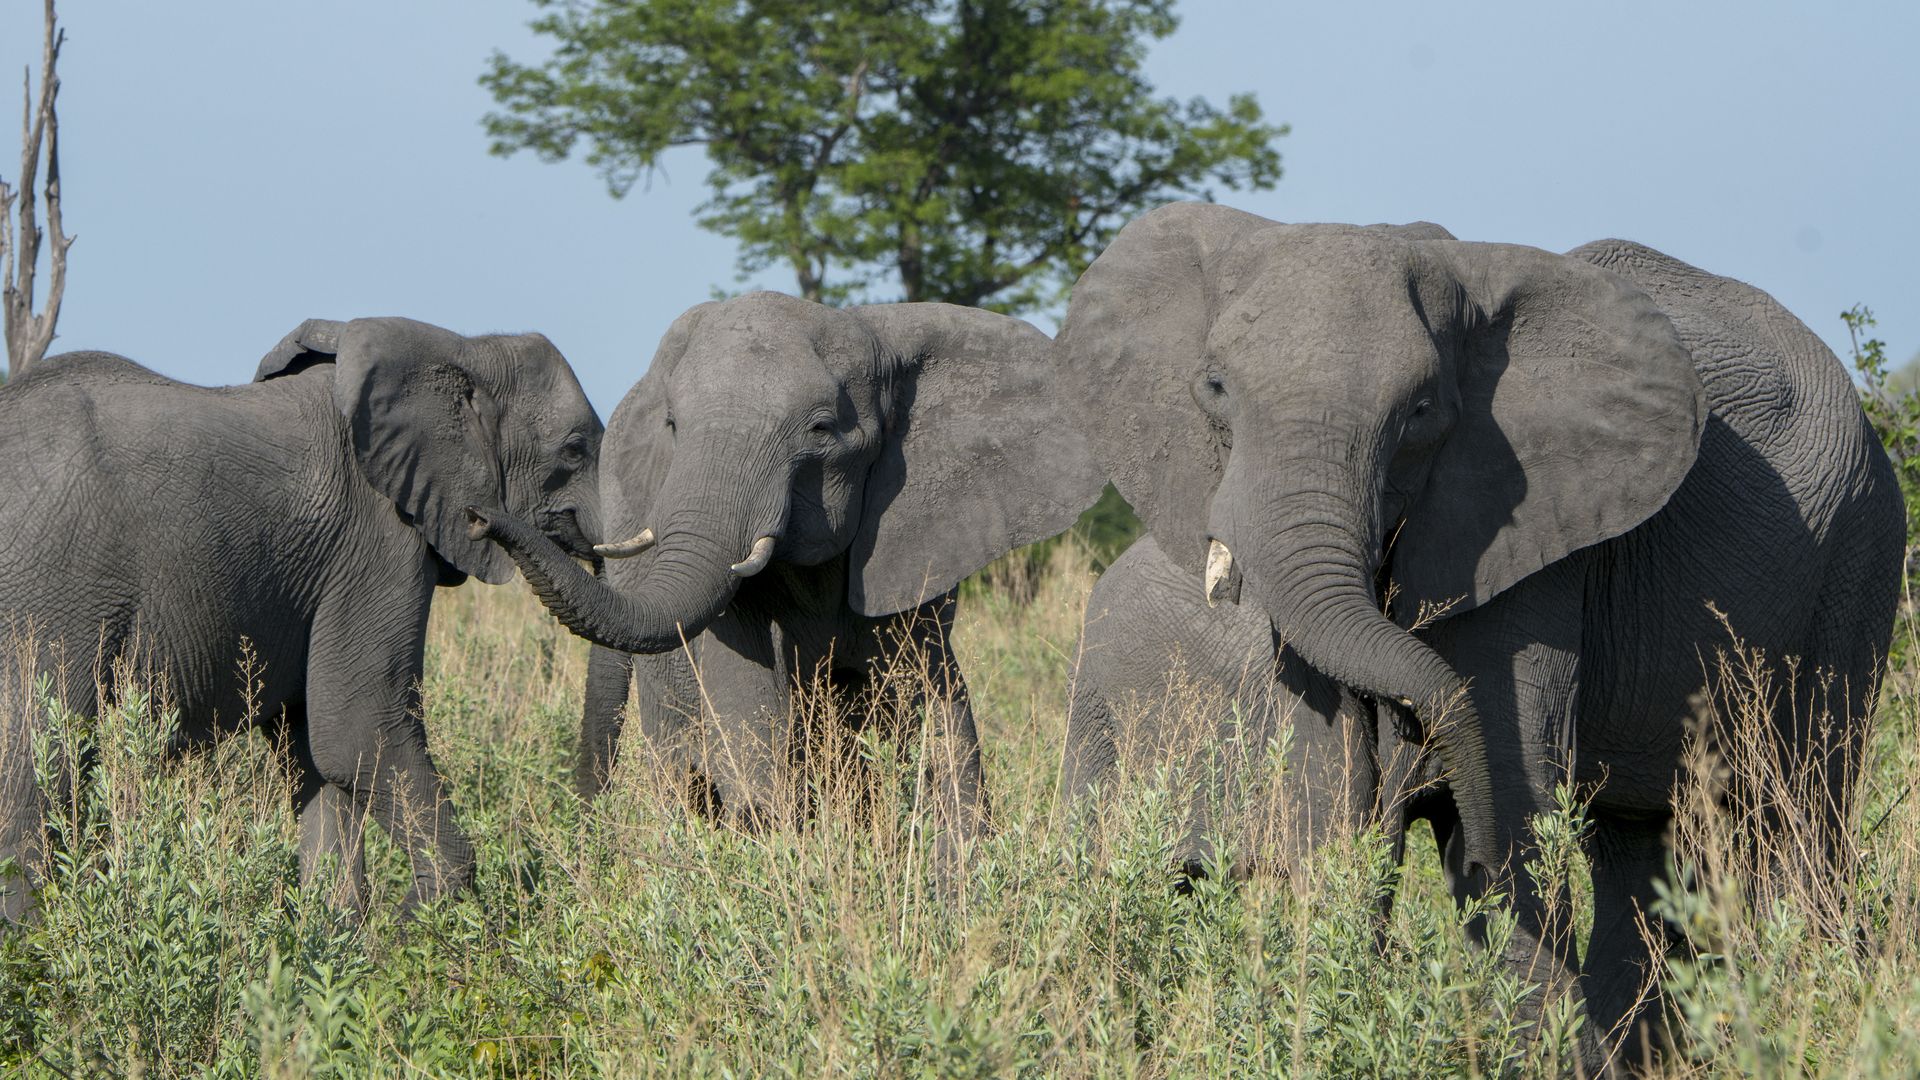 African elephants (Loxodonta africana) in the Gomoti Plains area, a community run concession, on the edge of the Gomoti river system southeast of the Okavango Delta, Botswana